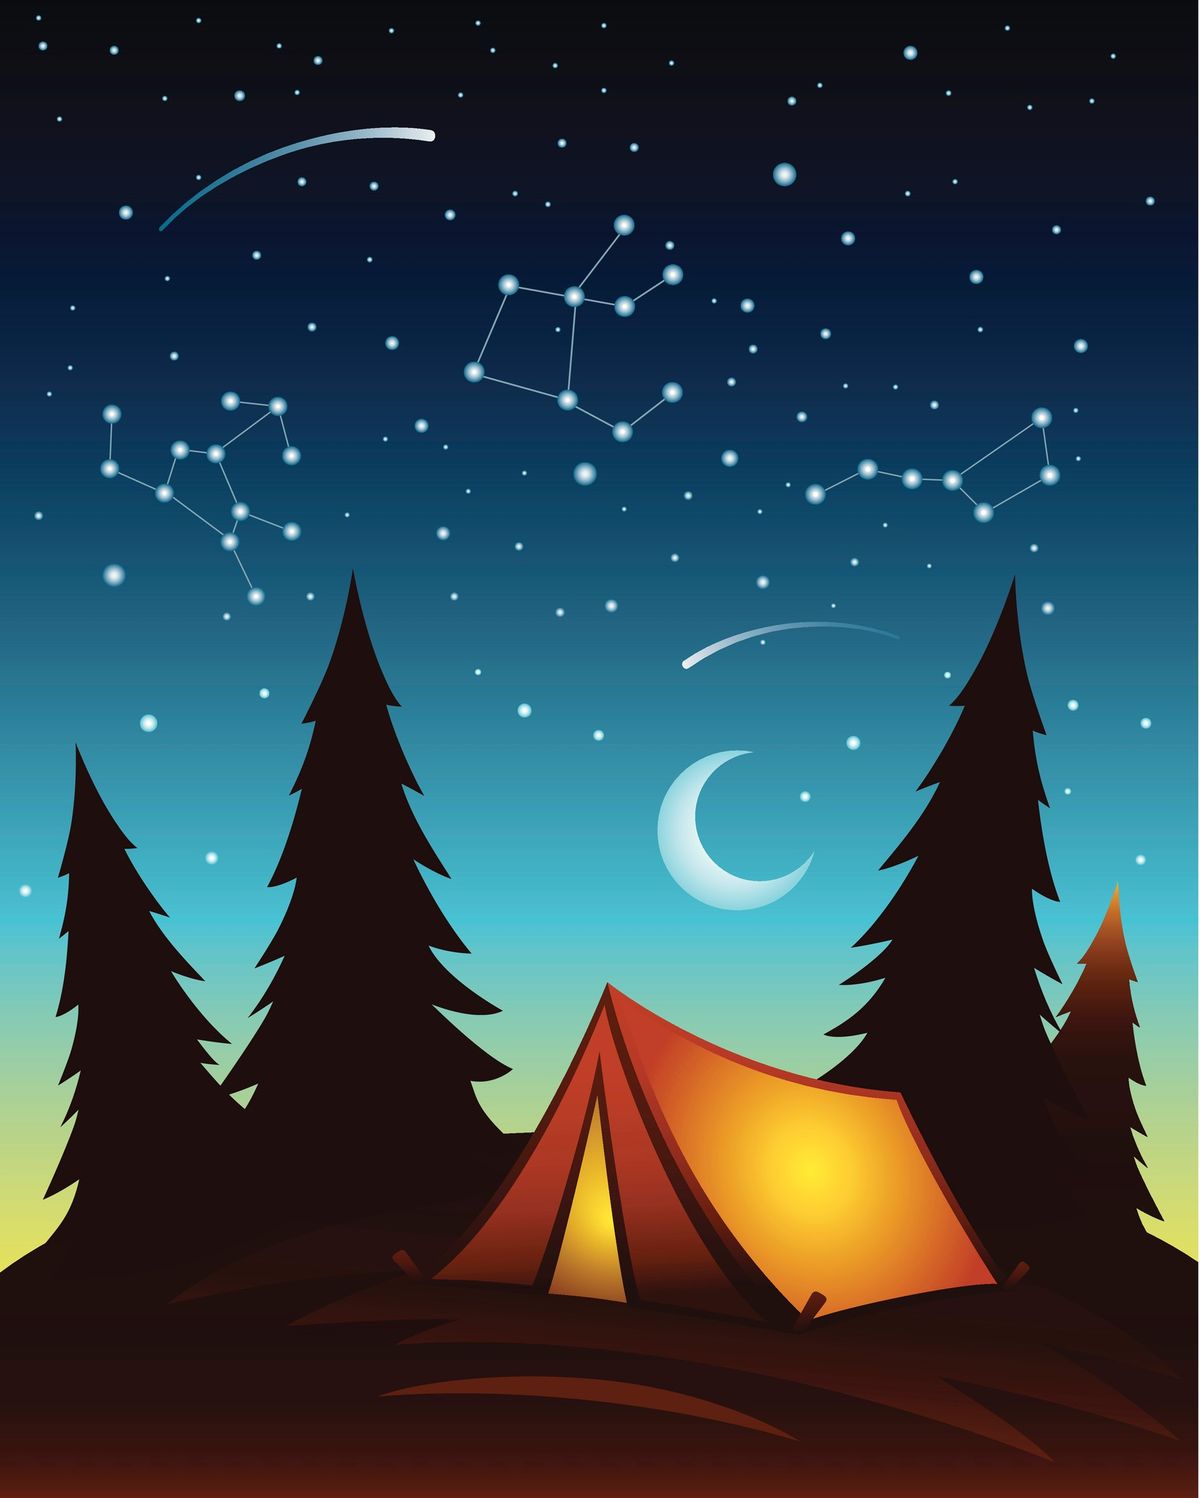 "Camping Under the Stars" Art Camp